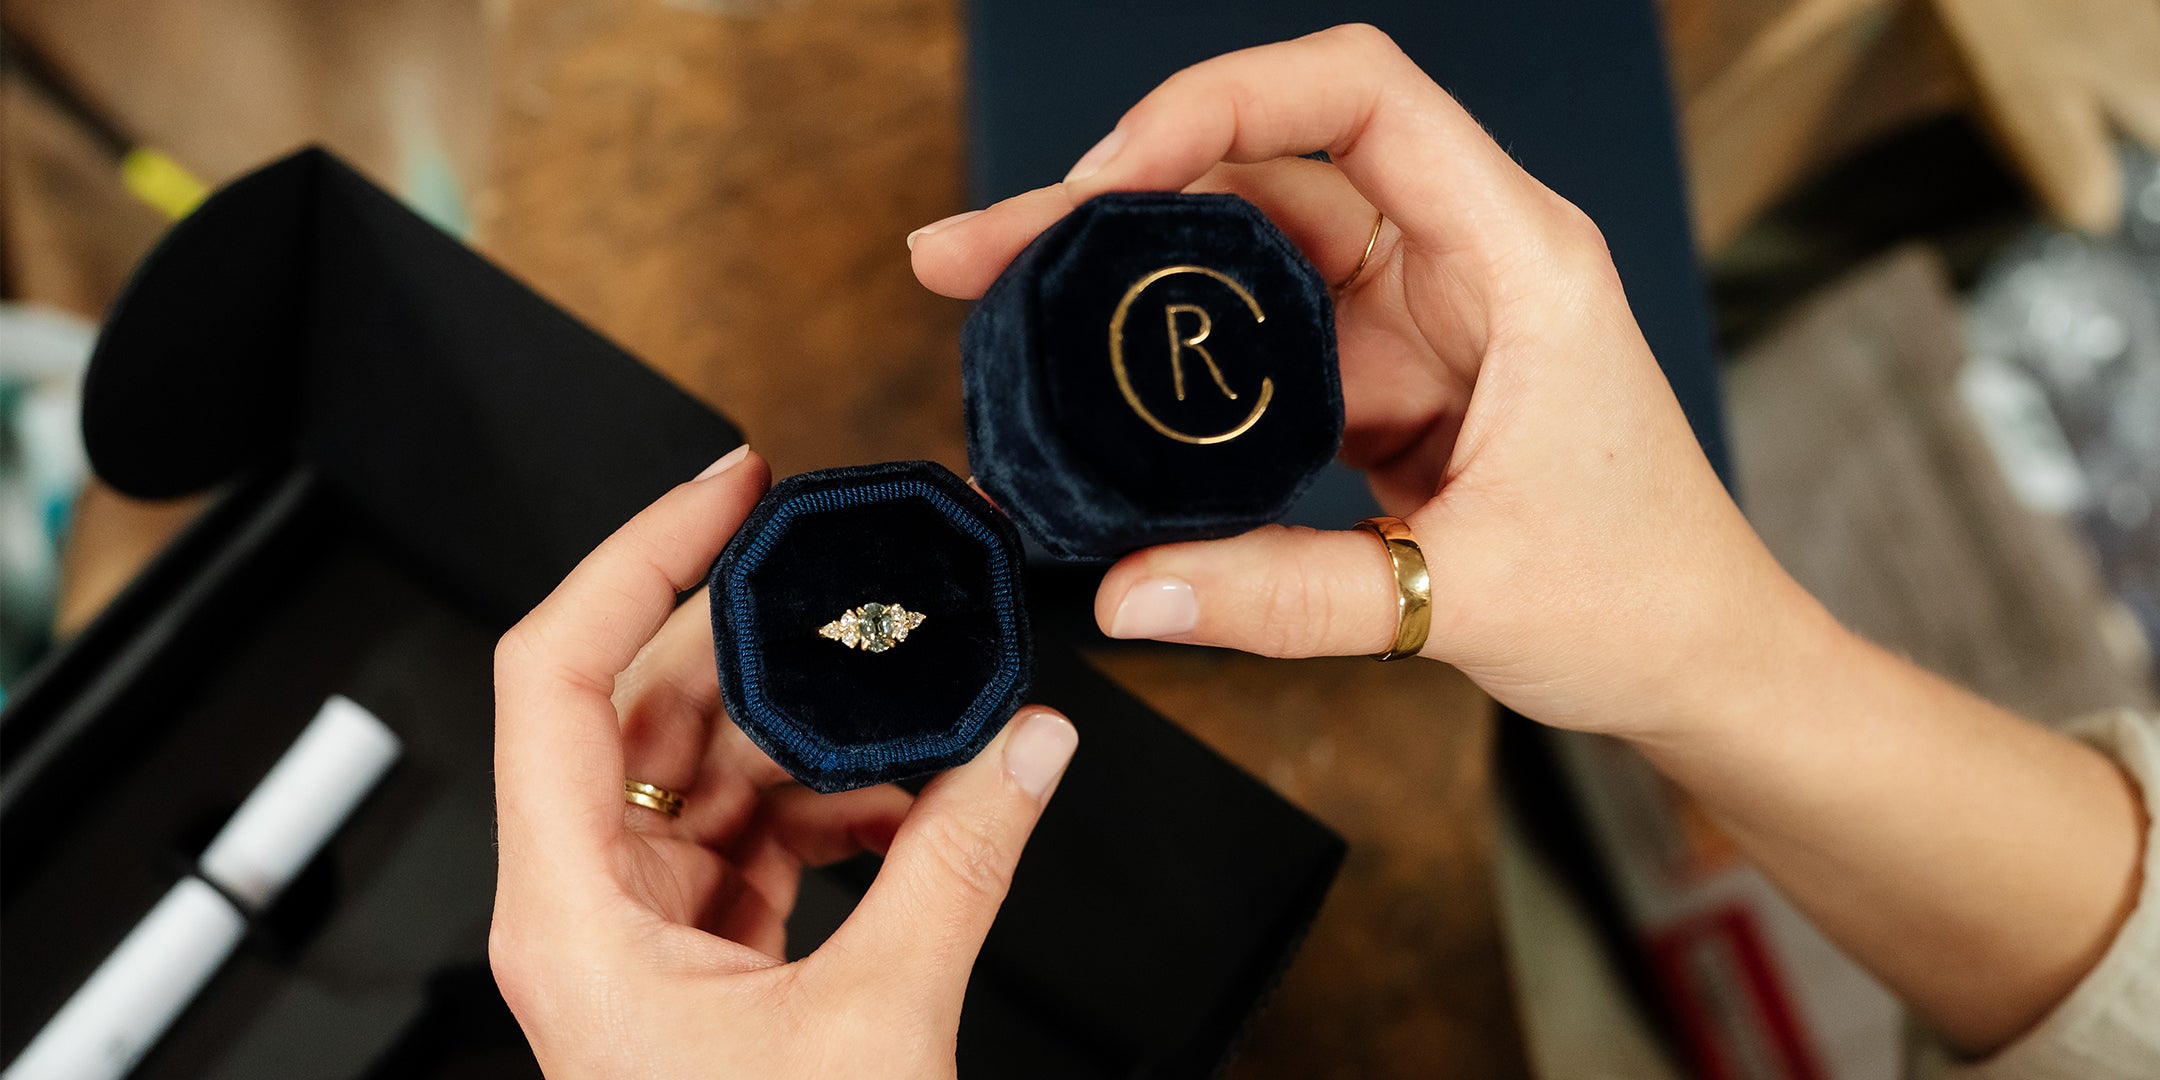 Woman's hands holding a handmade bespoke engagement ring in a ring box